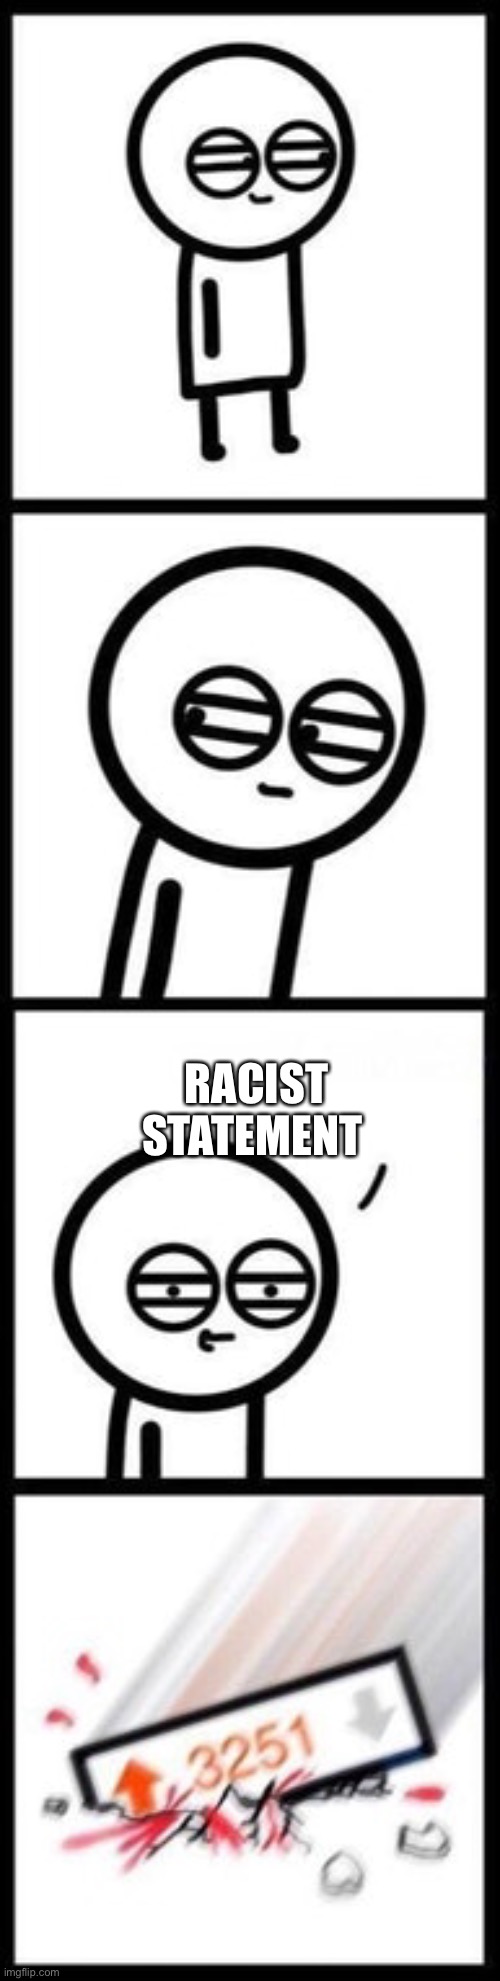 3251 upvotes | RACIST STATEMENT | image tagged in 3251 upvotes | made w/ Imgflip meme maker